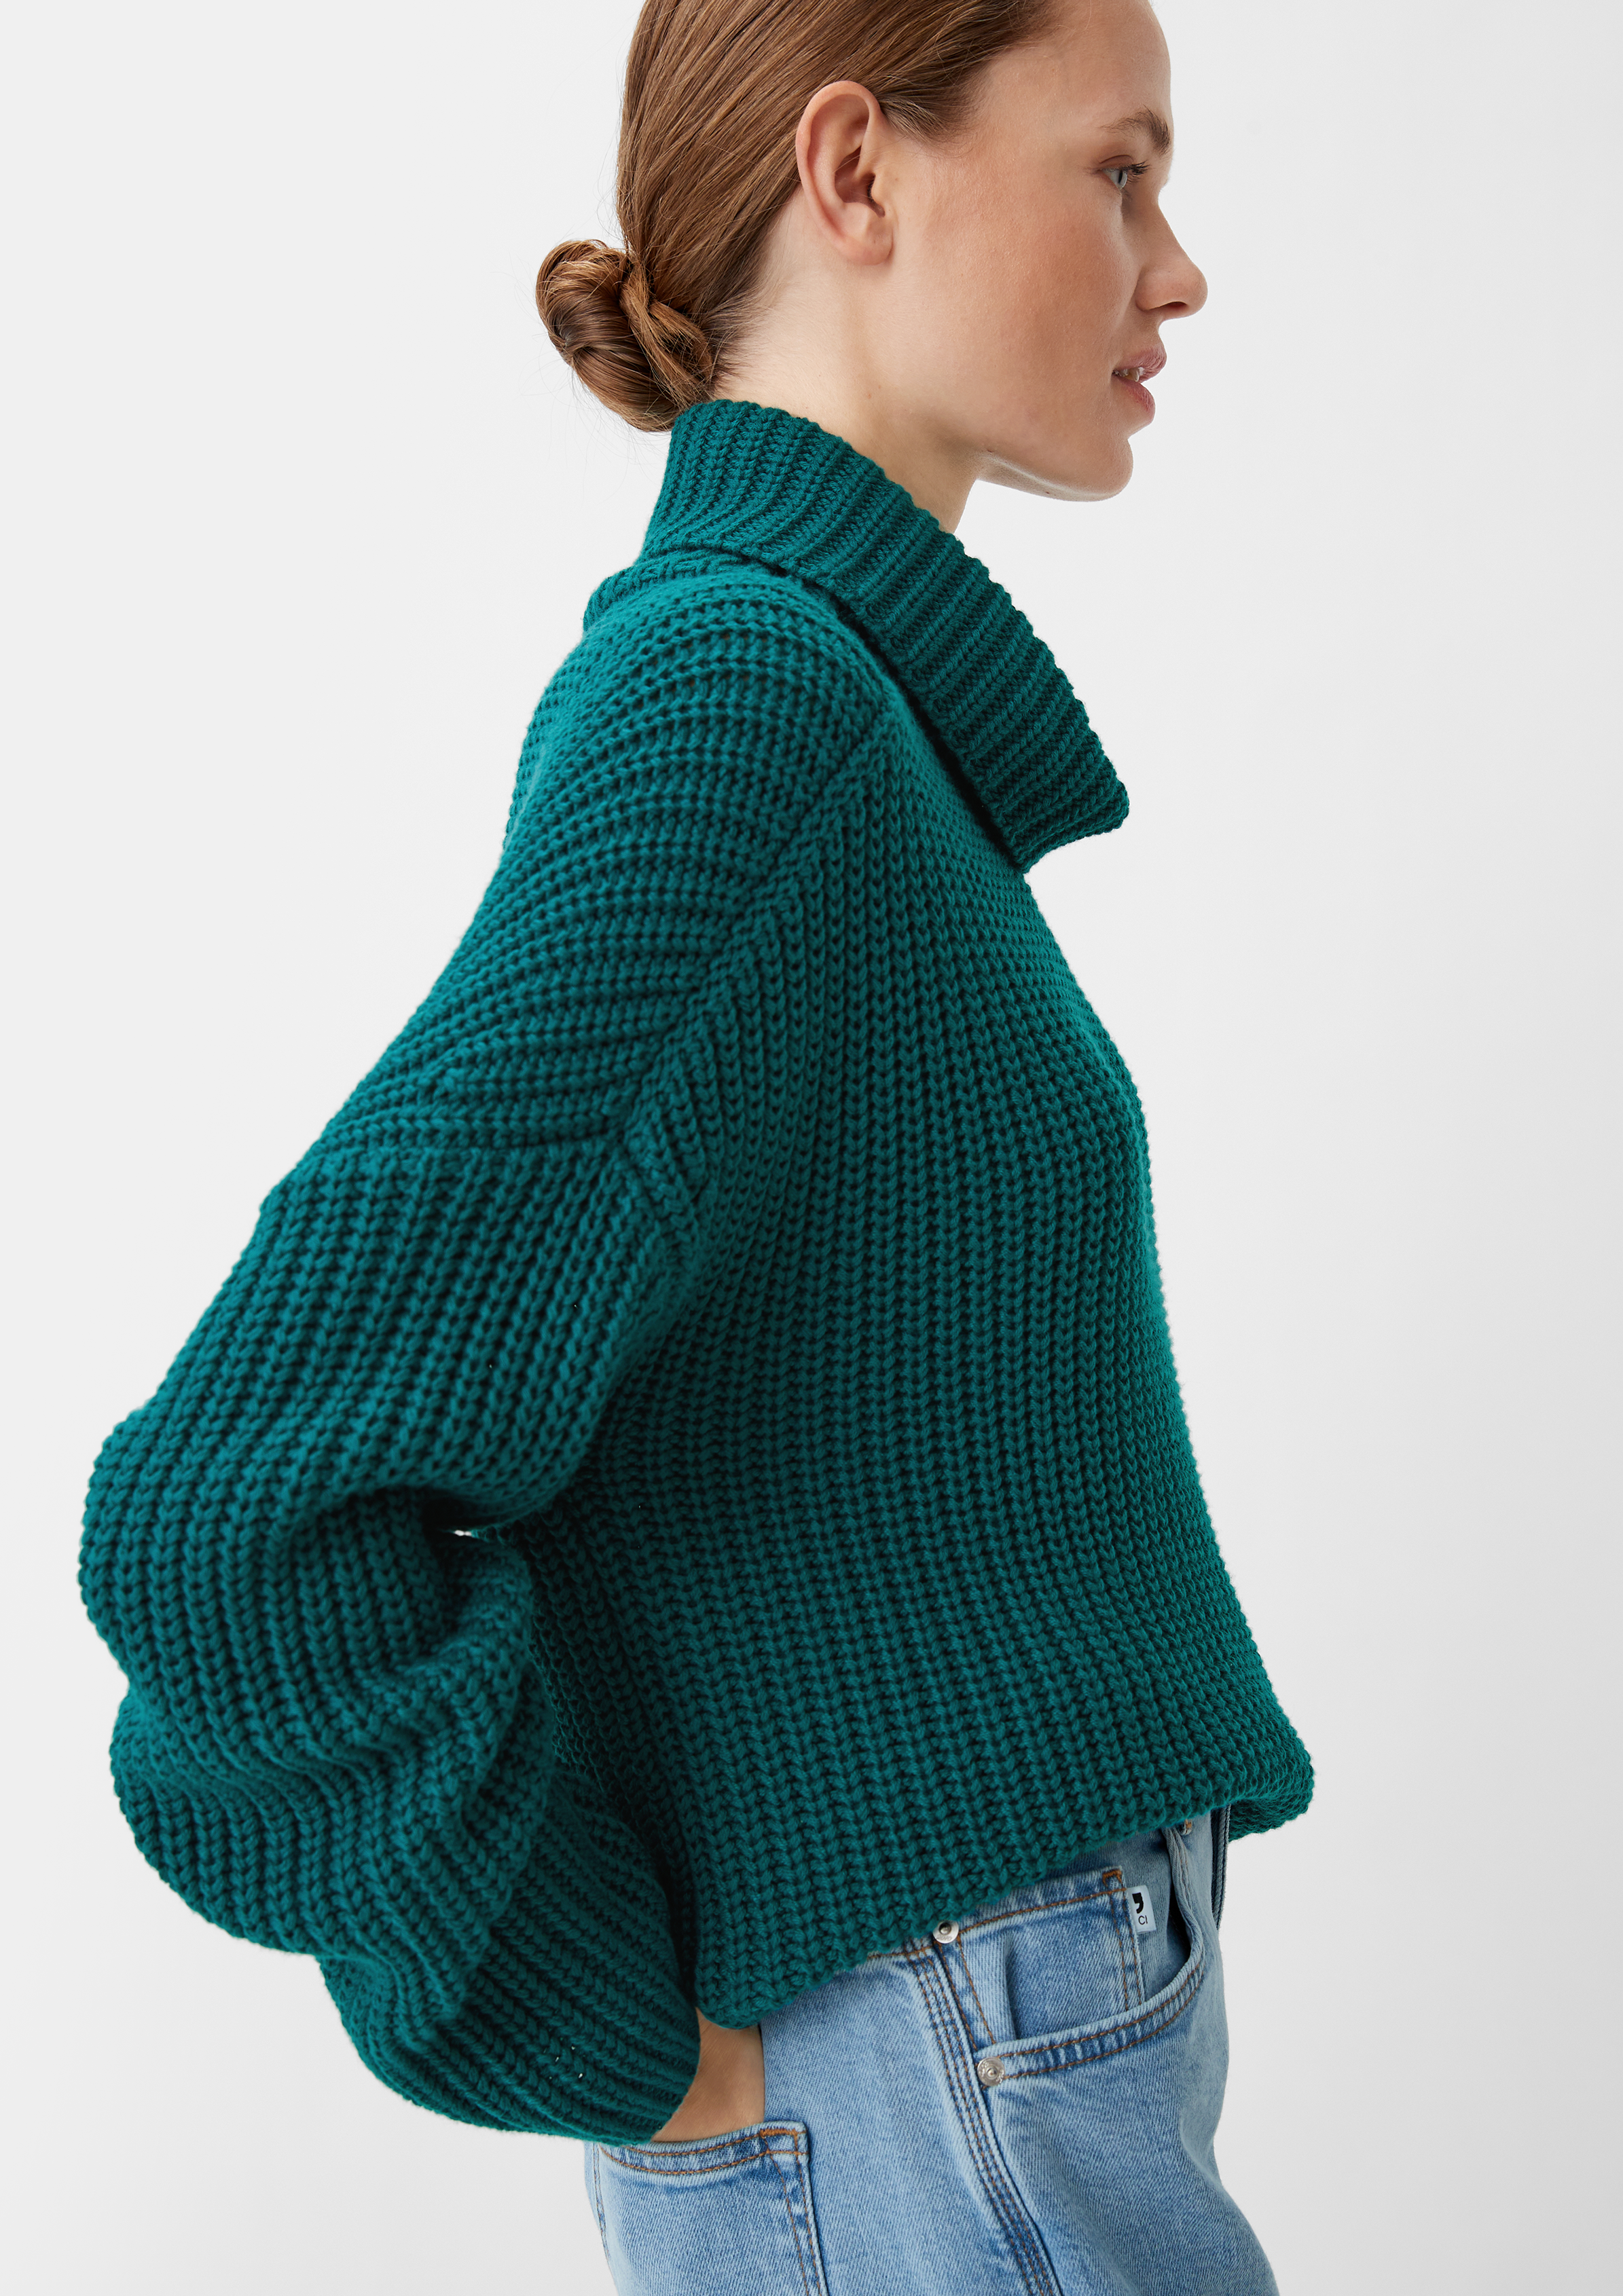 Loose-fitting knitted jumper with a neck | - Comma polo petrol